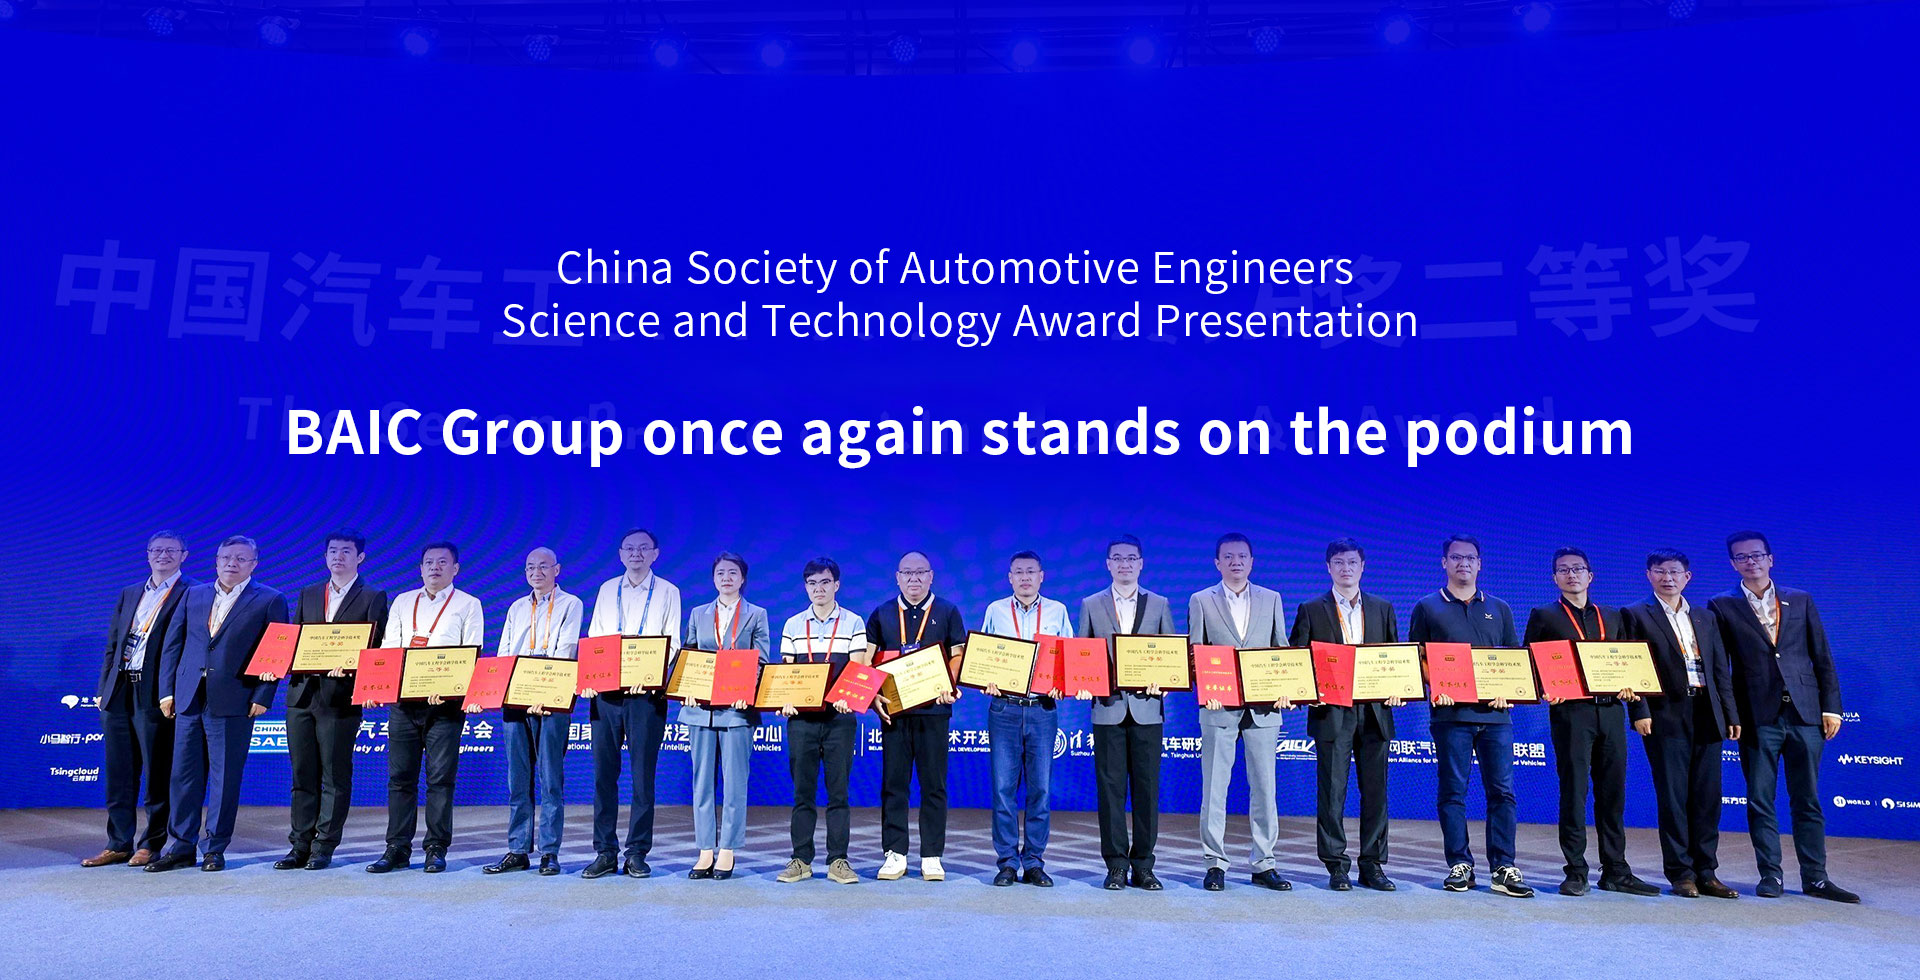 BAIC Group once again stands on the podium.